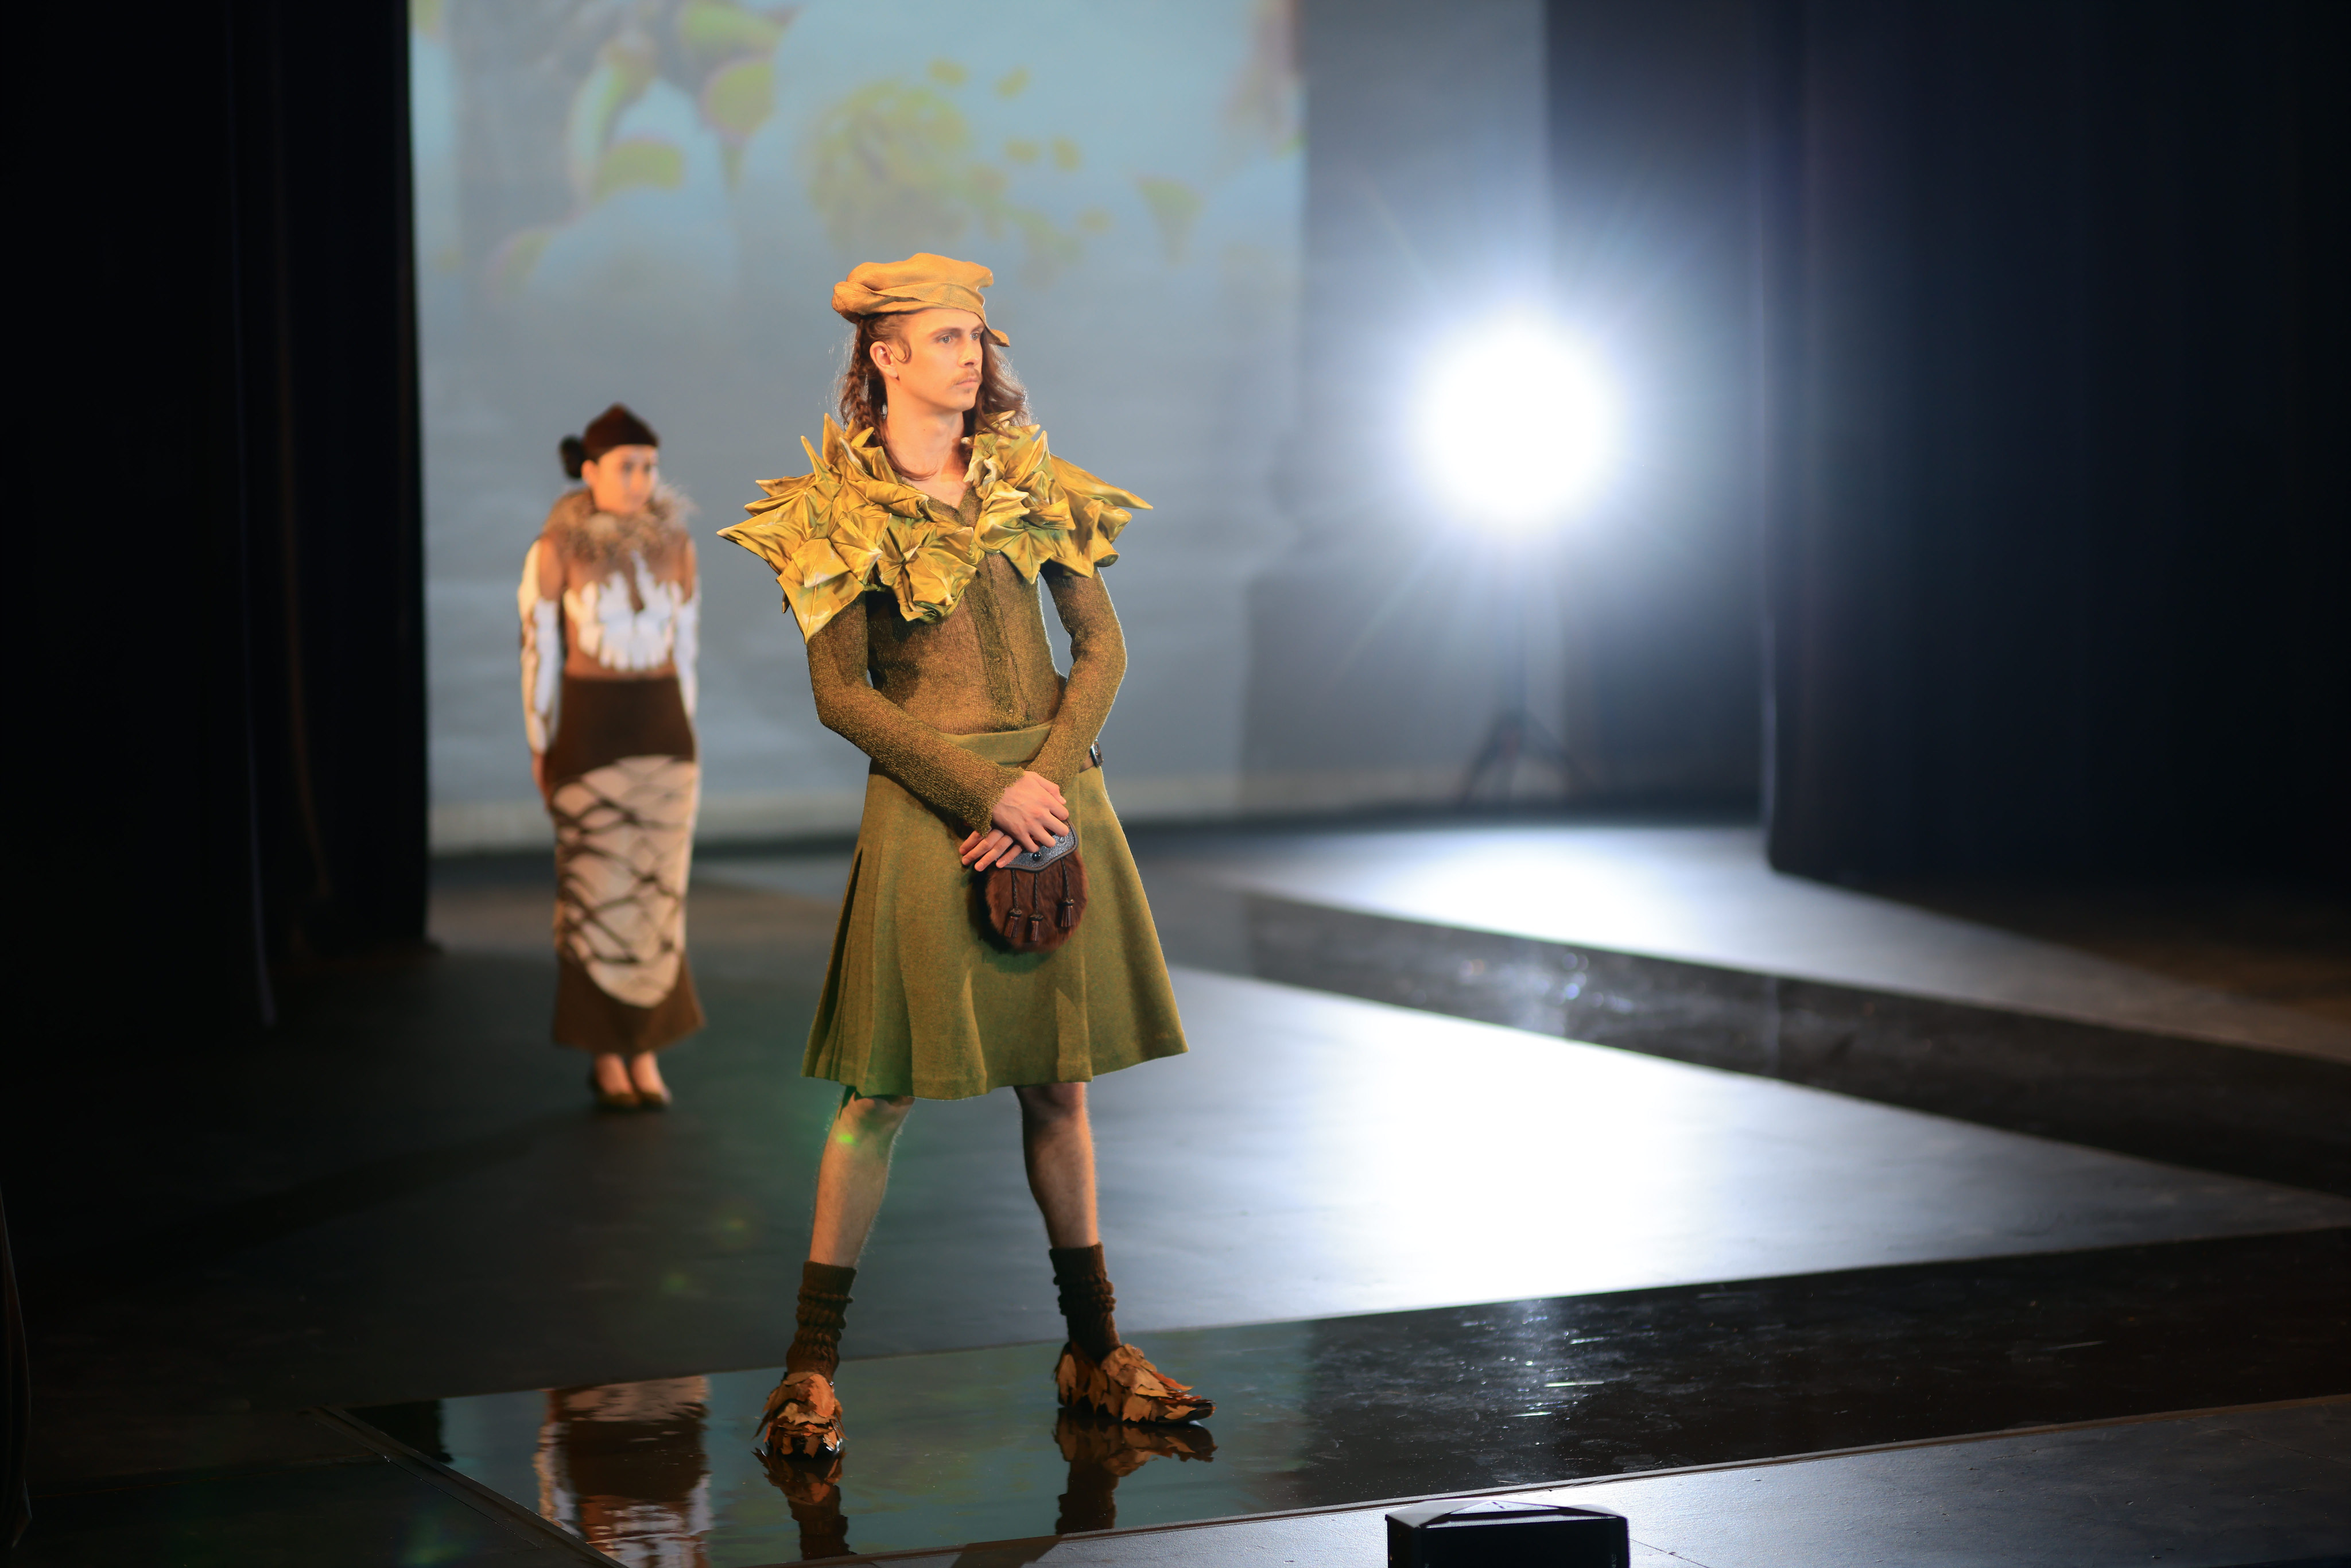 On the runway, a model strikes a pose in a vibrant ensemble, donning a green hat, a long-sleeved green top with a leafy shoulder cover, a coordinating green skirt, dark brown tube socks, and stylish loafers adorned with brown leaves. In the background, another model awaits their turn to walk.